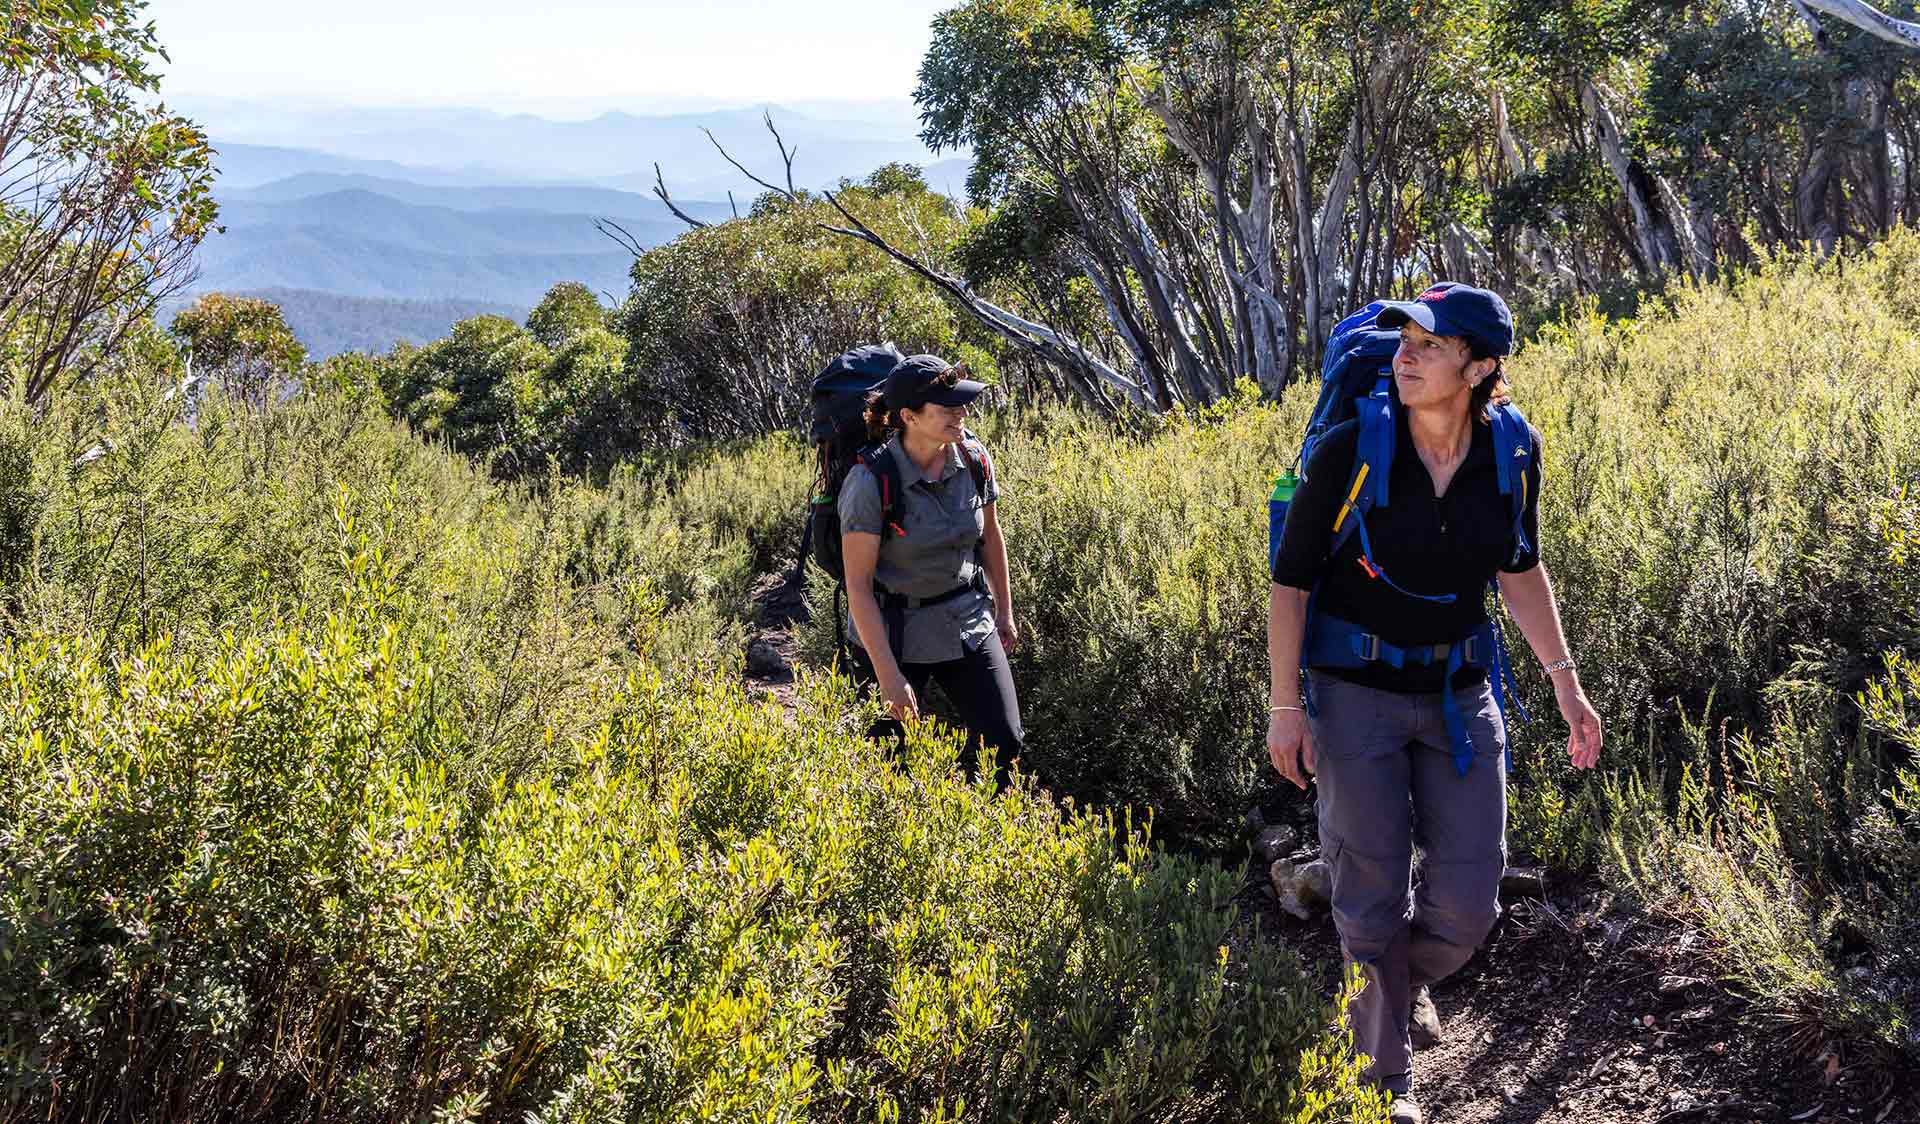 Two women follow the path through scrub up Mt Bogong with mountain views in the distance.